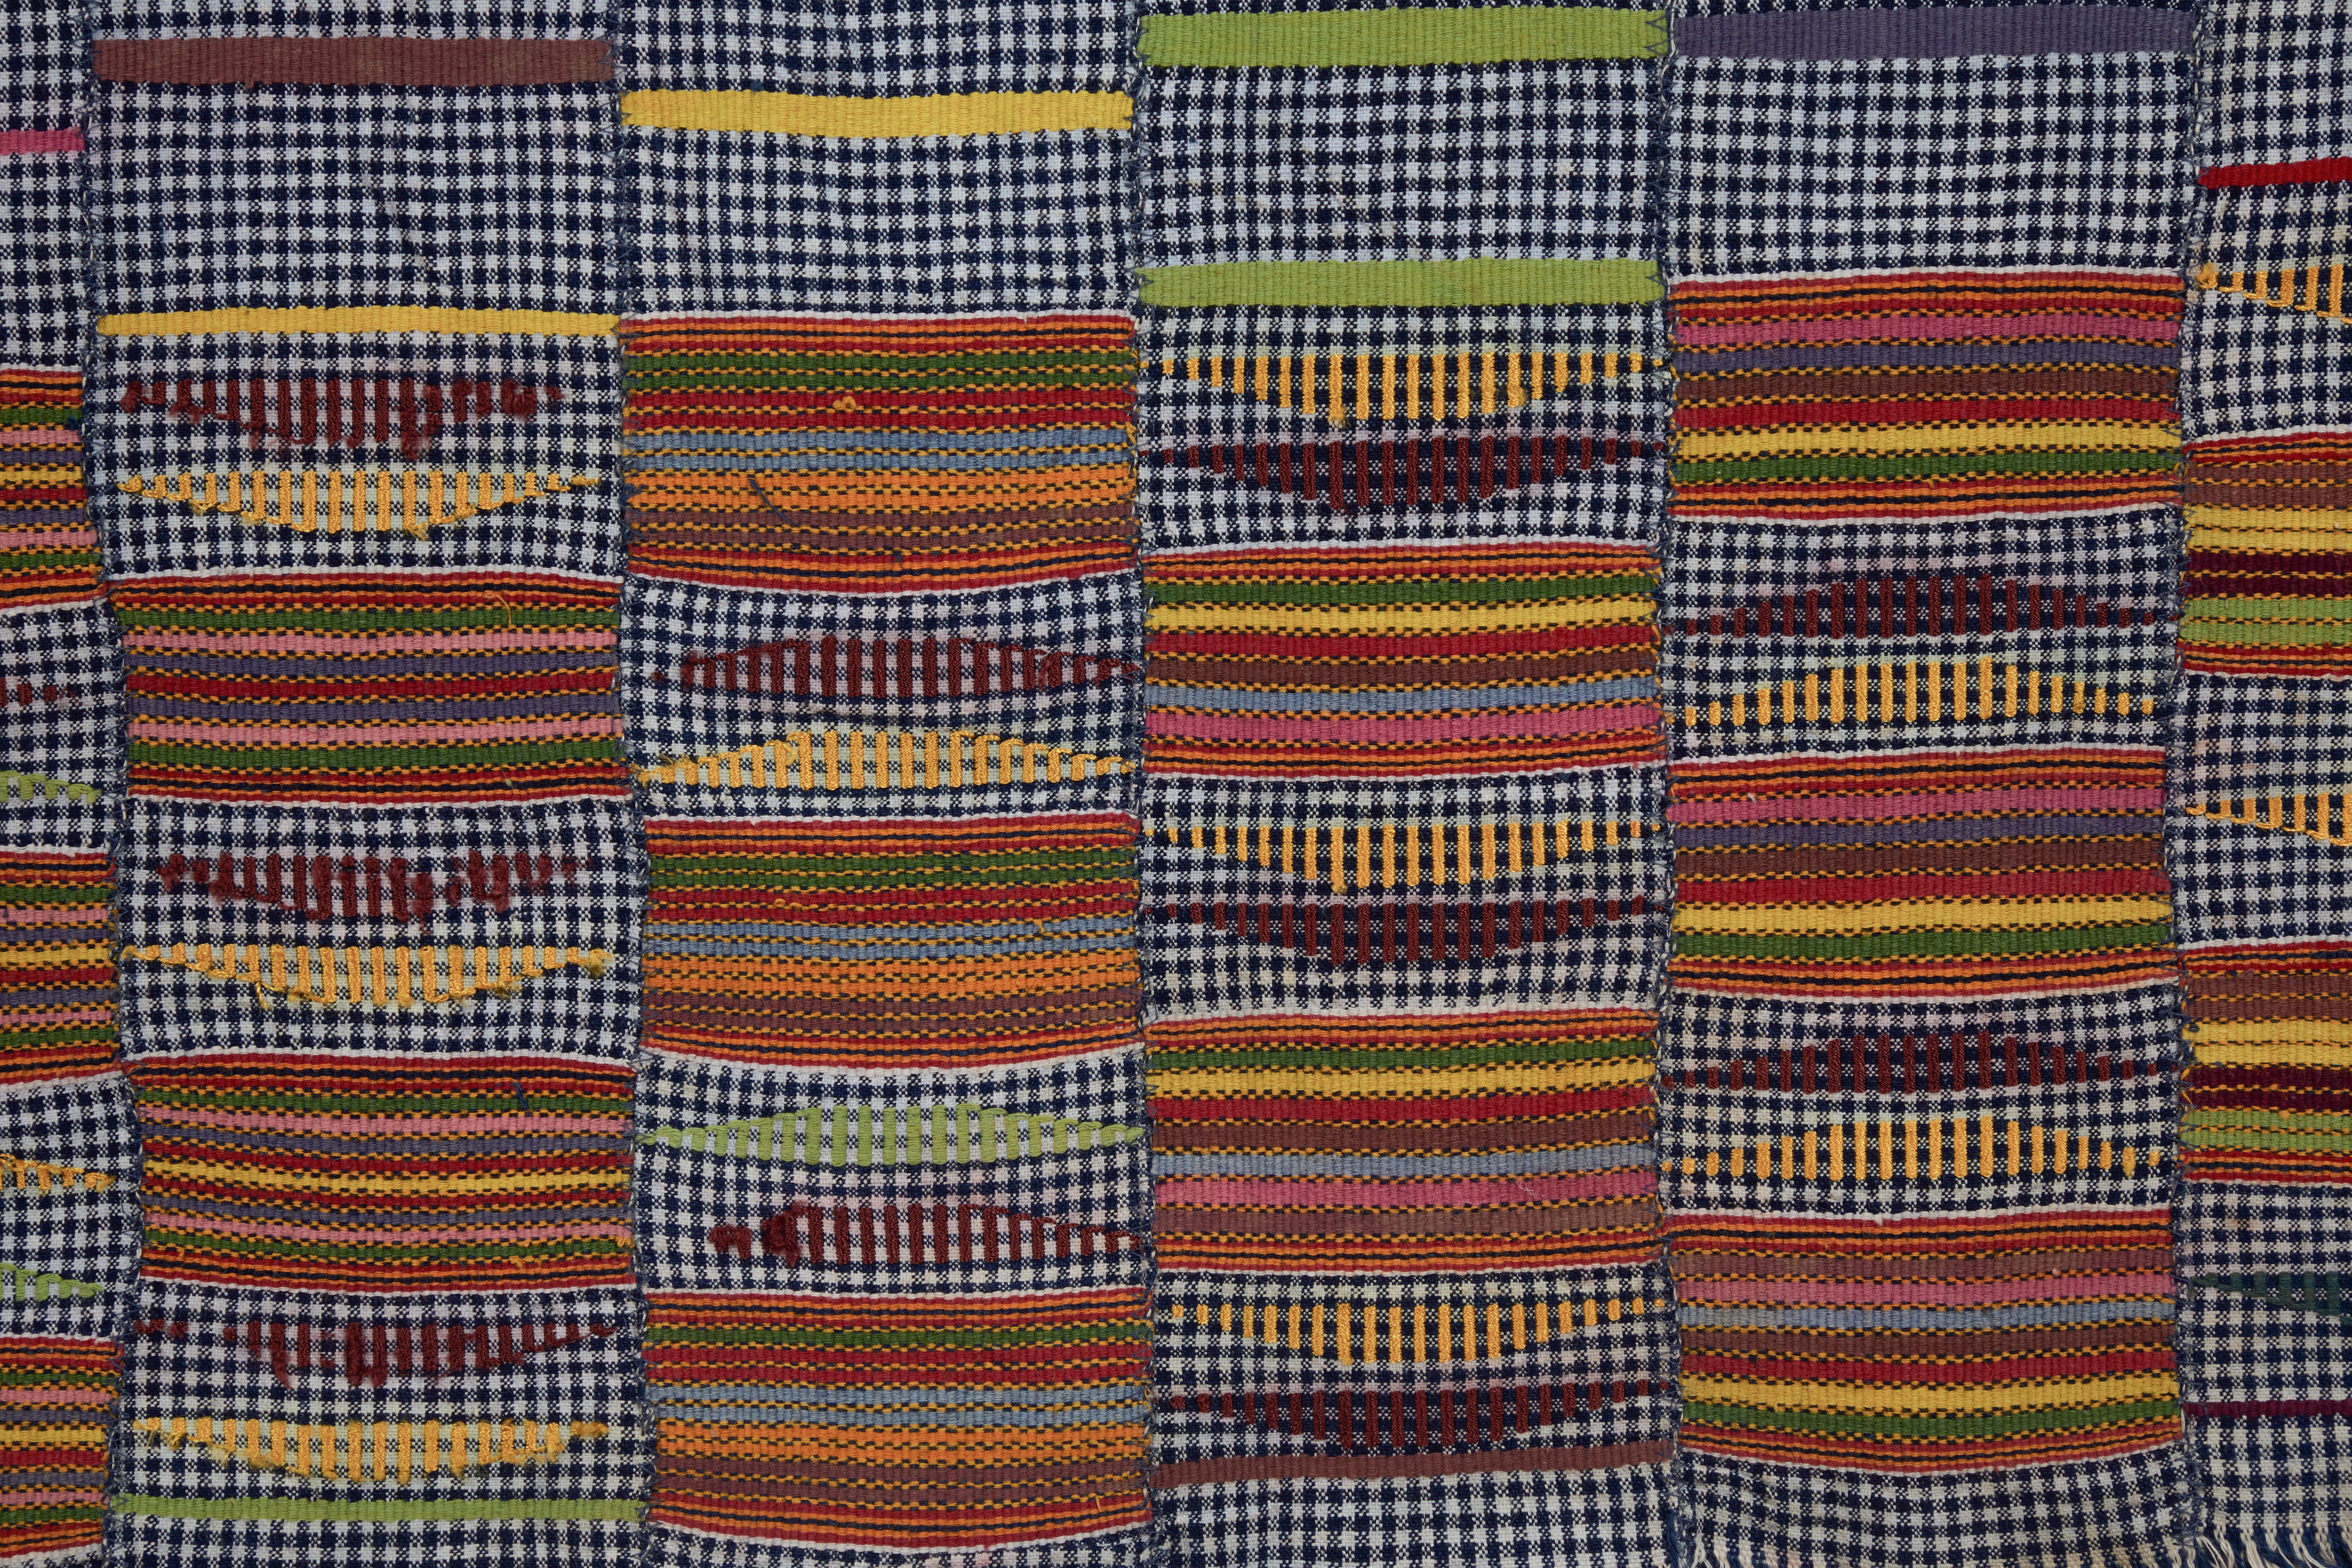 Strips of narrow handwoven cloth sewn selvedge to selvedge. Chequered cloth with warp and weft faced alternating blocks of color. Ghana, Africa.
 